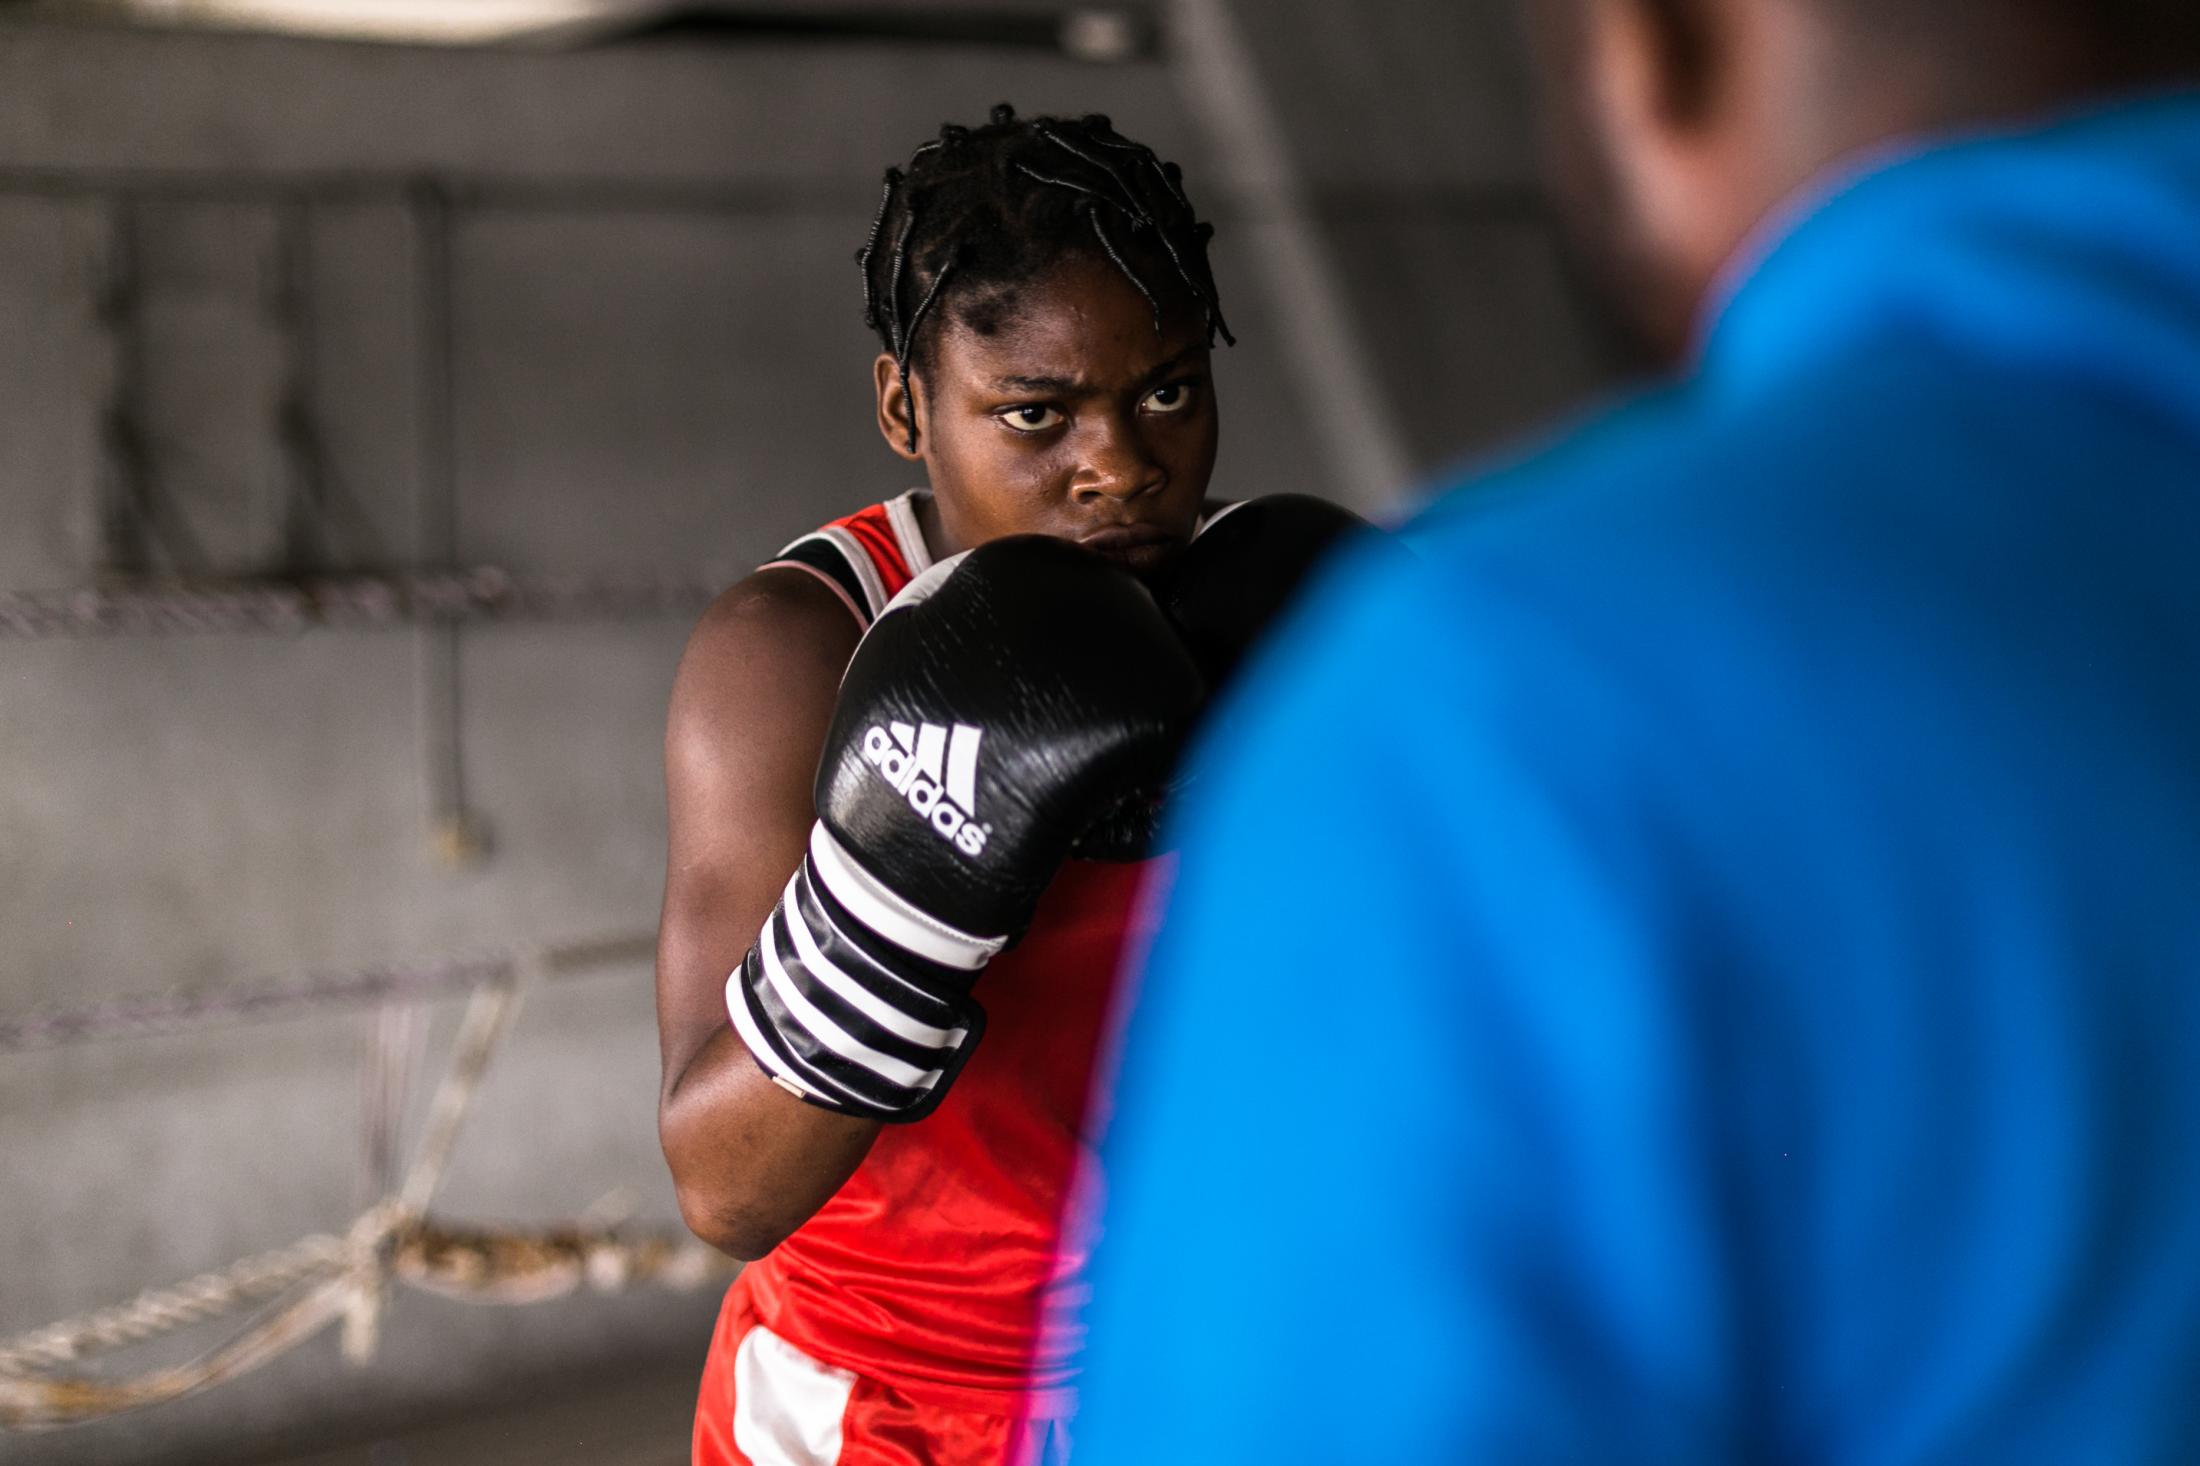 Female Boxing in Nigeria - 11 July 2019: Princess, 17 in a training session with...